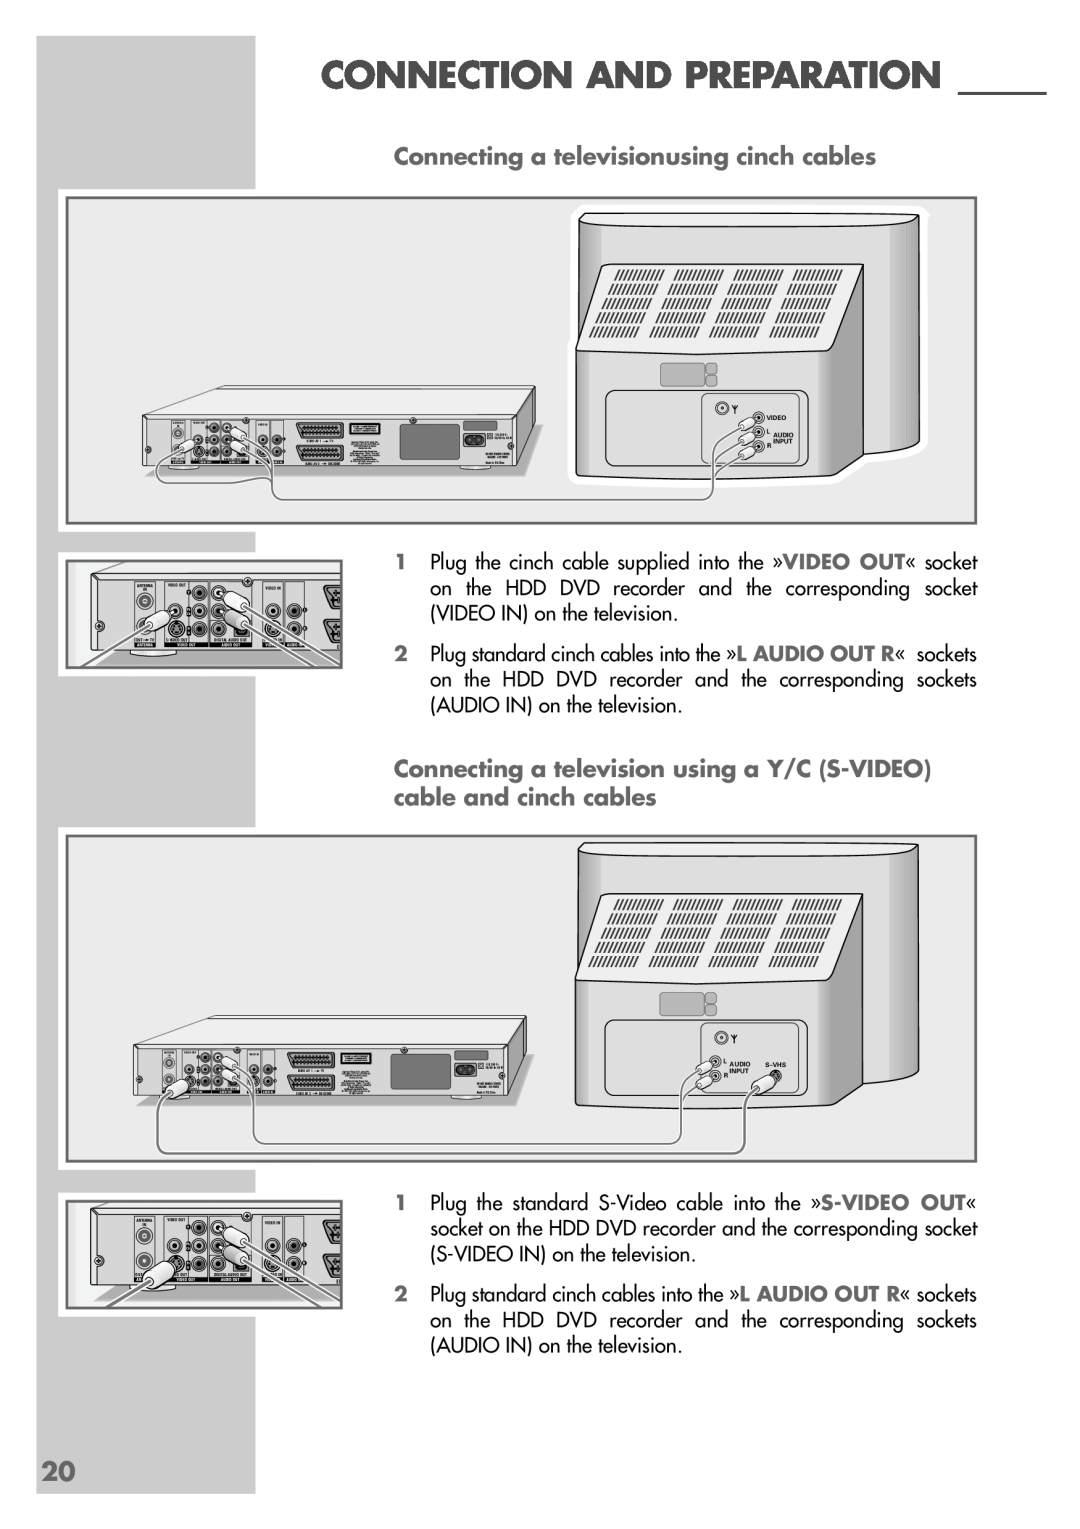 Grundig 5550 HDD manual Connecting a televisionusing cinch cables, Connection And Preparation 